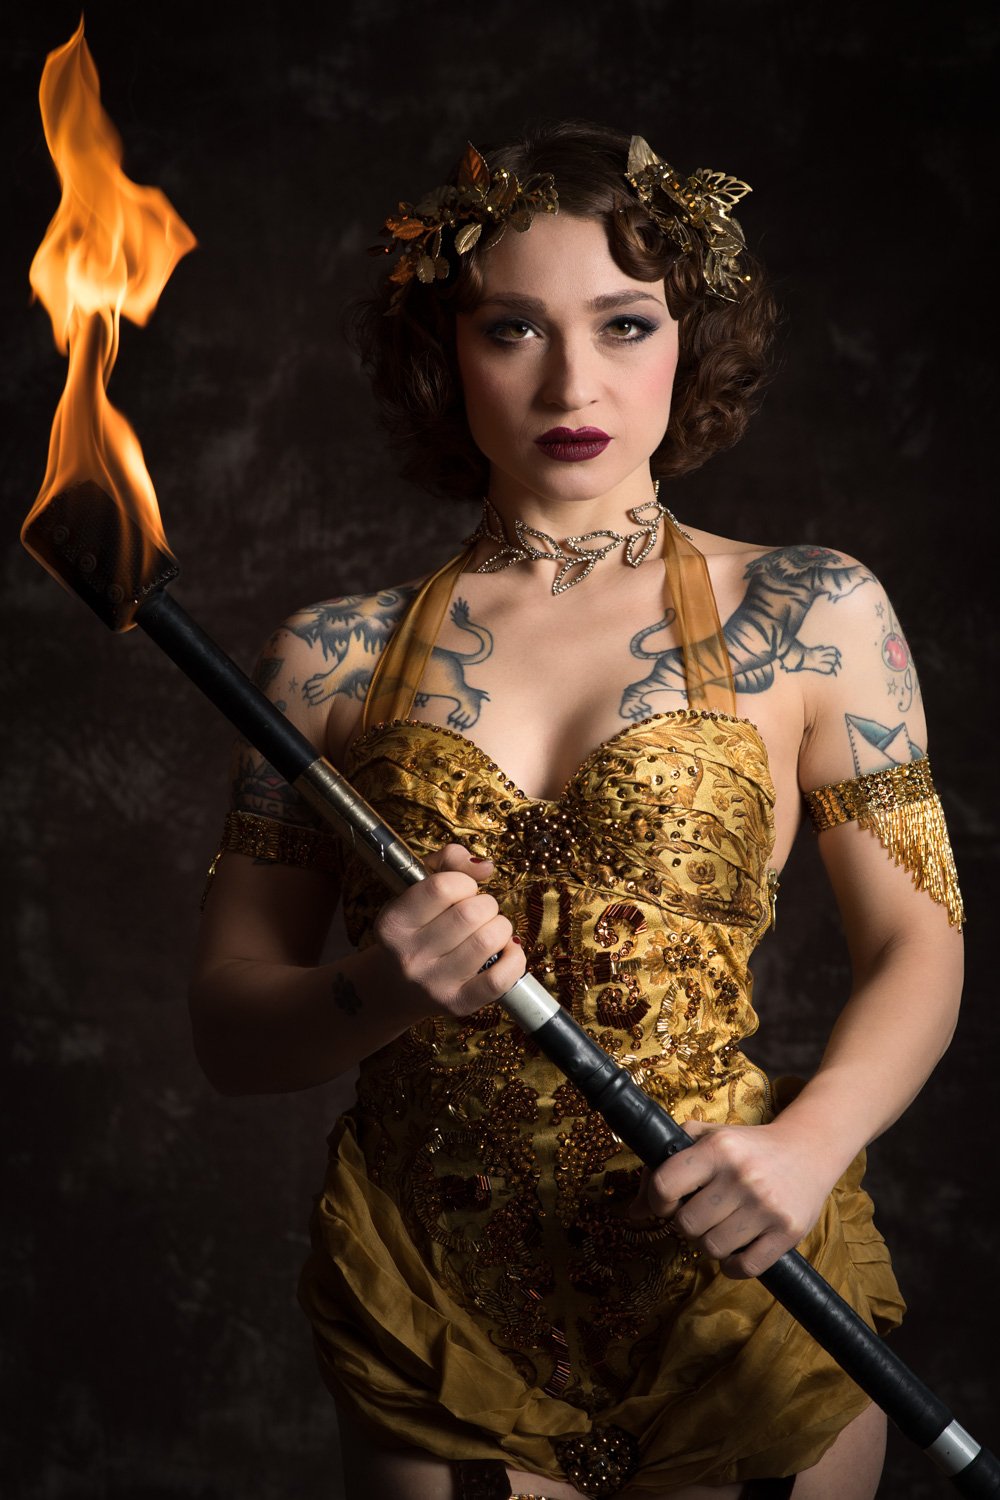 Image of Janet Fischietto as "The Fire Goddess"